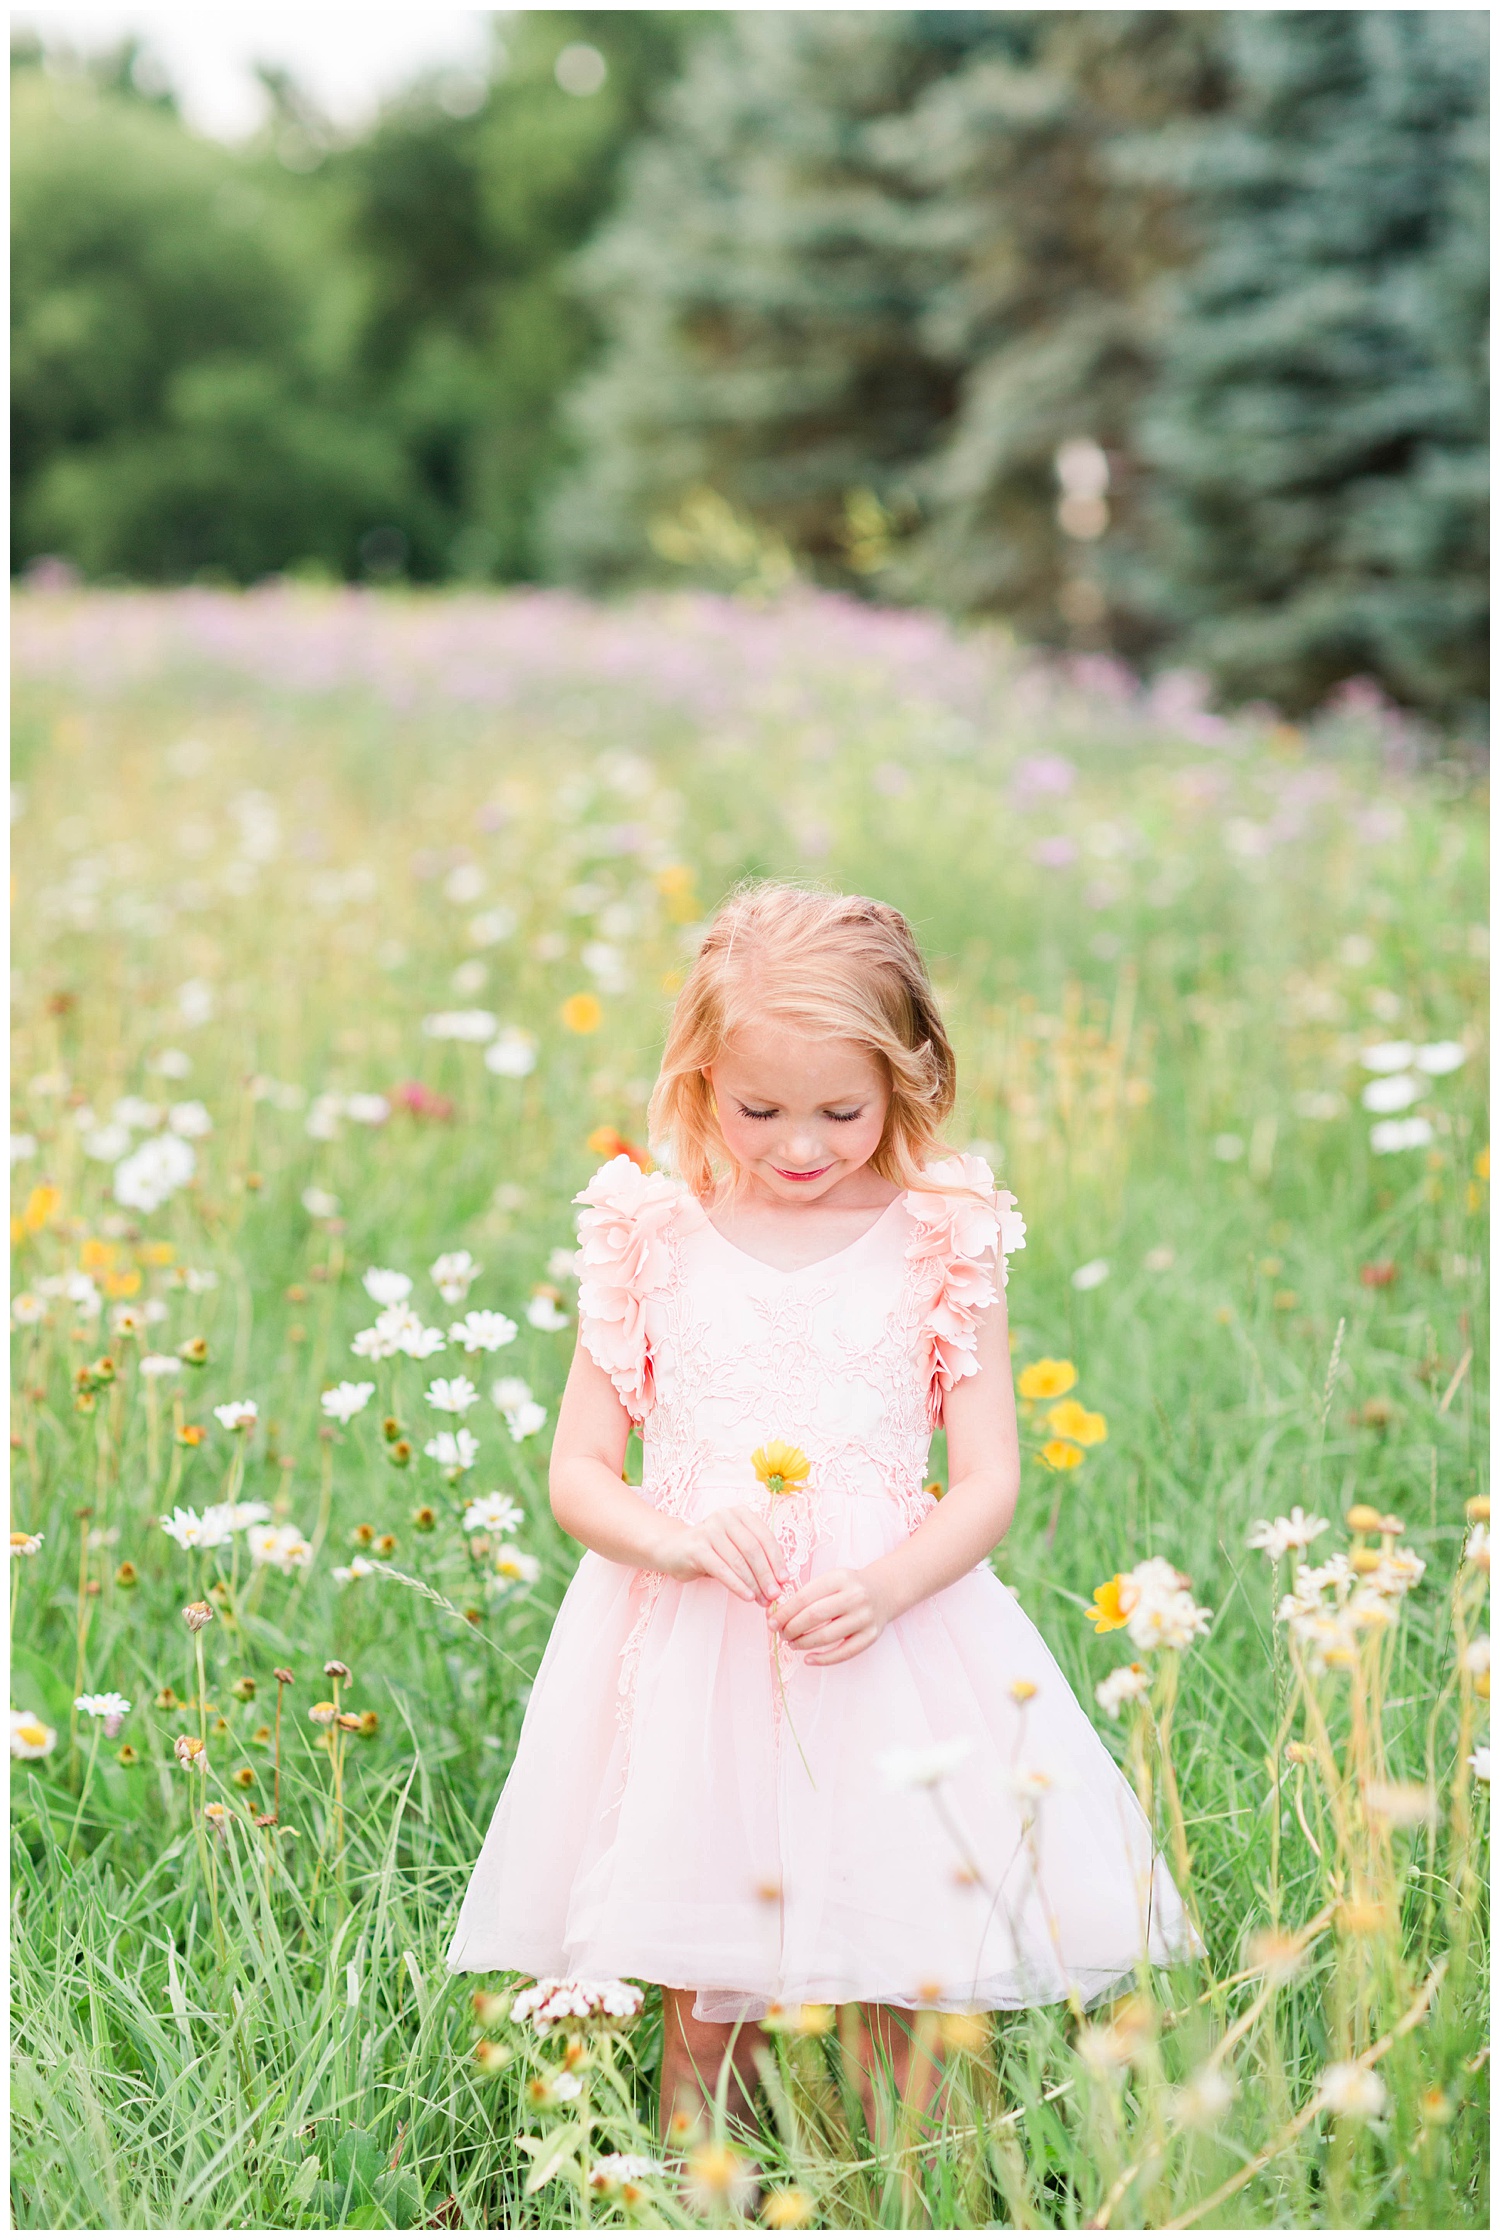 Little Liella stands in a field of wild flowers holding a yellow flower wearing tutu du monde couture dress by Trish Scully | CB Studio